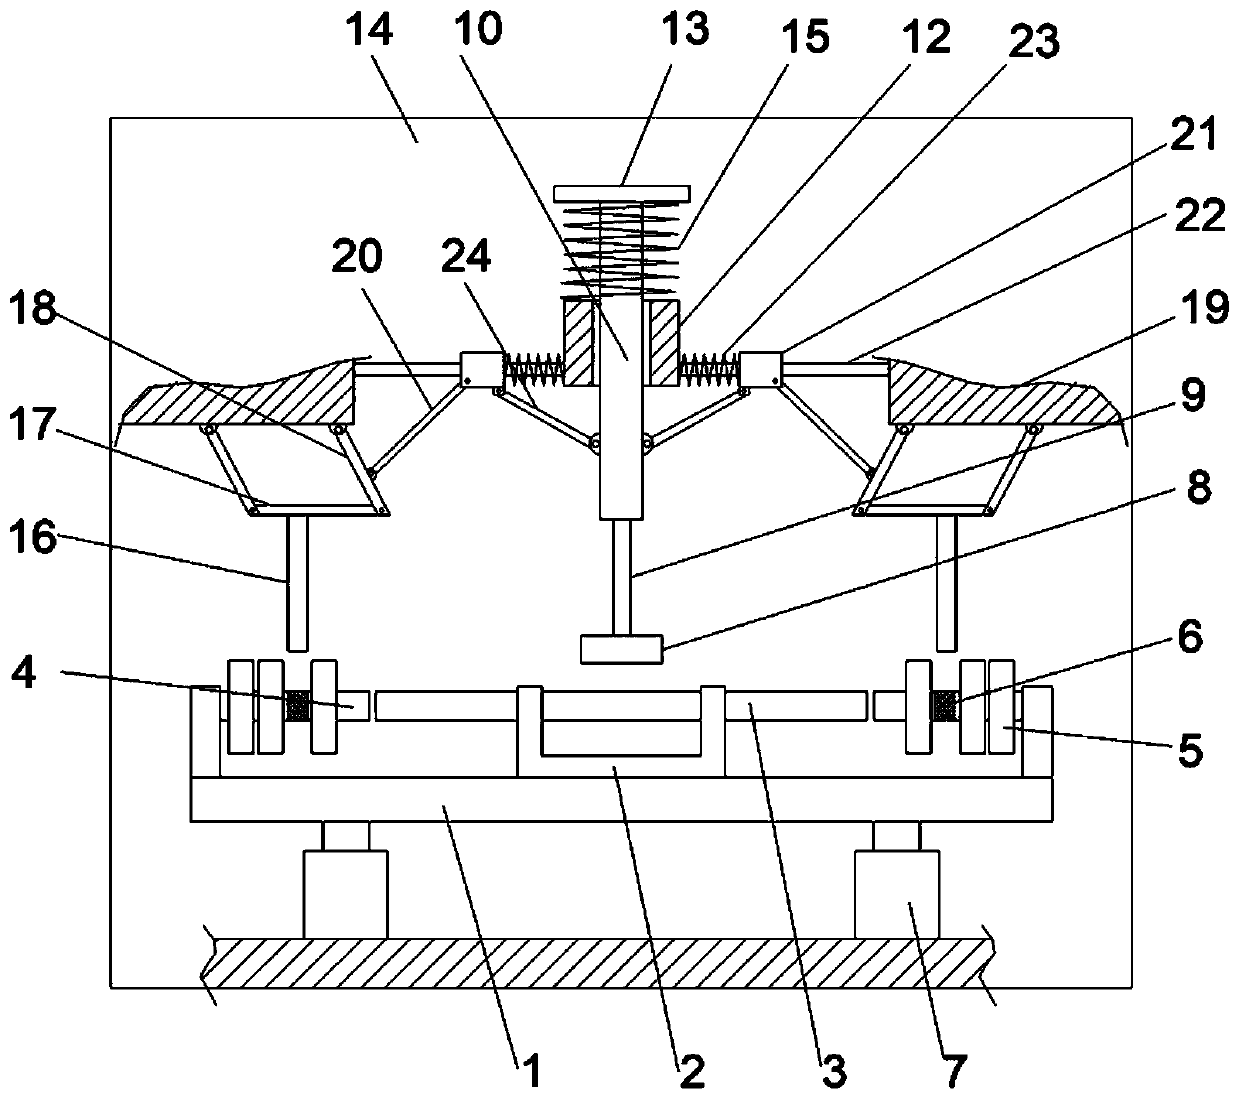 A barbell counterweight installation device and installation method for a gymnasium